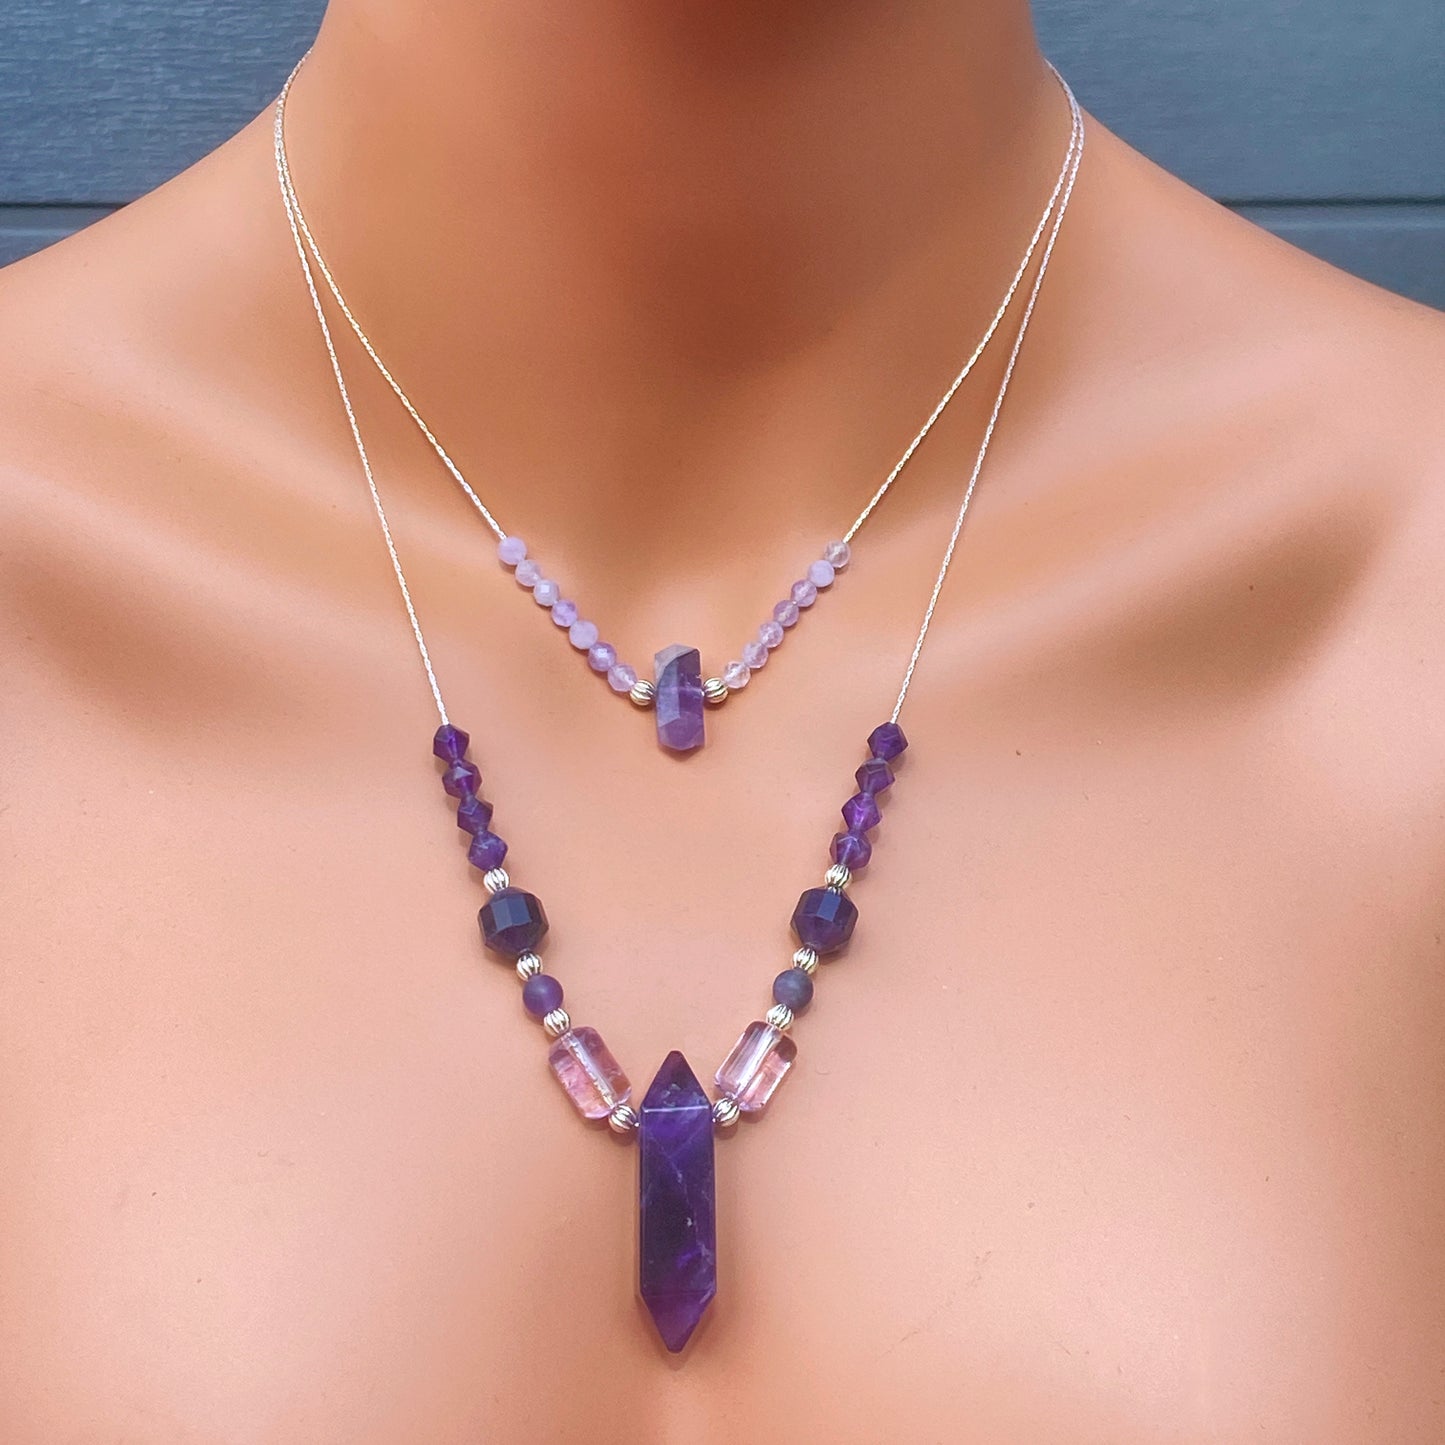 Amazing Layered Amethyst gemstone Necklace with sterling silver.